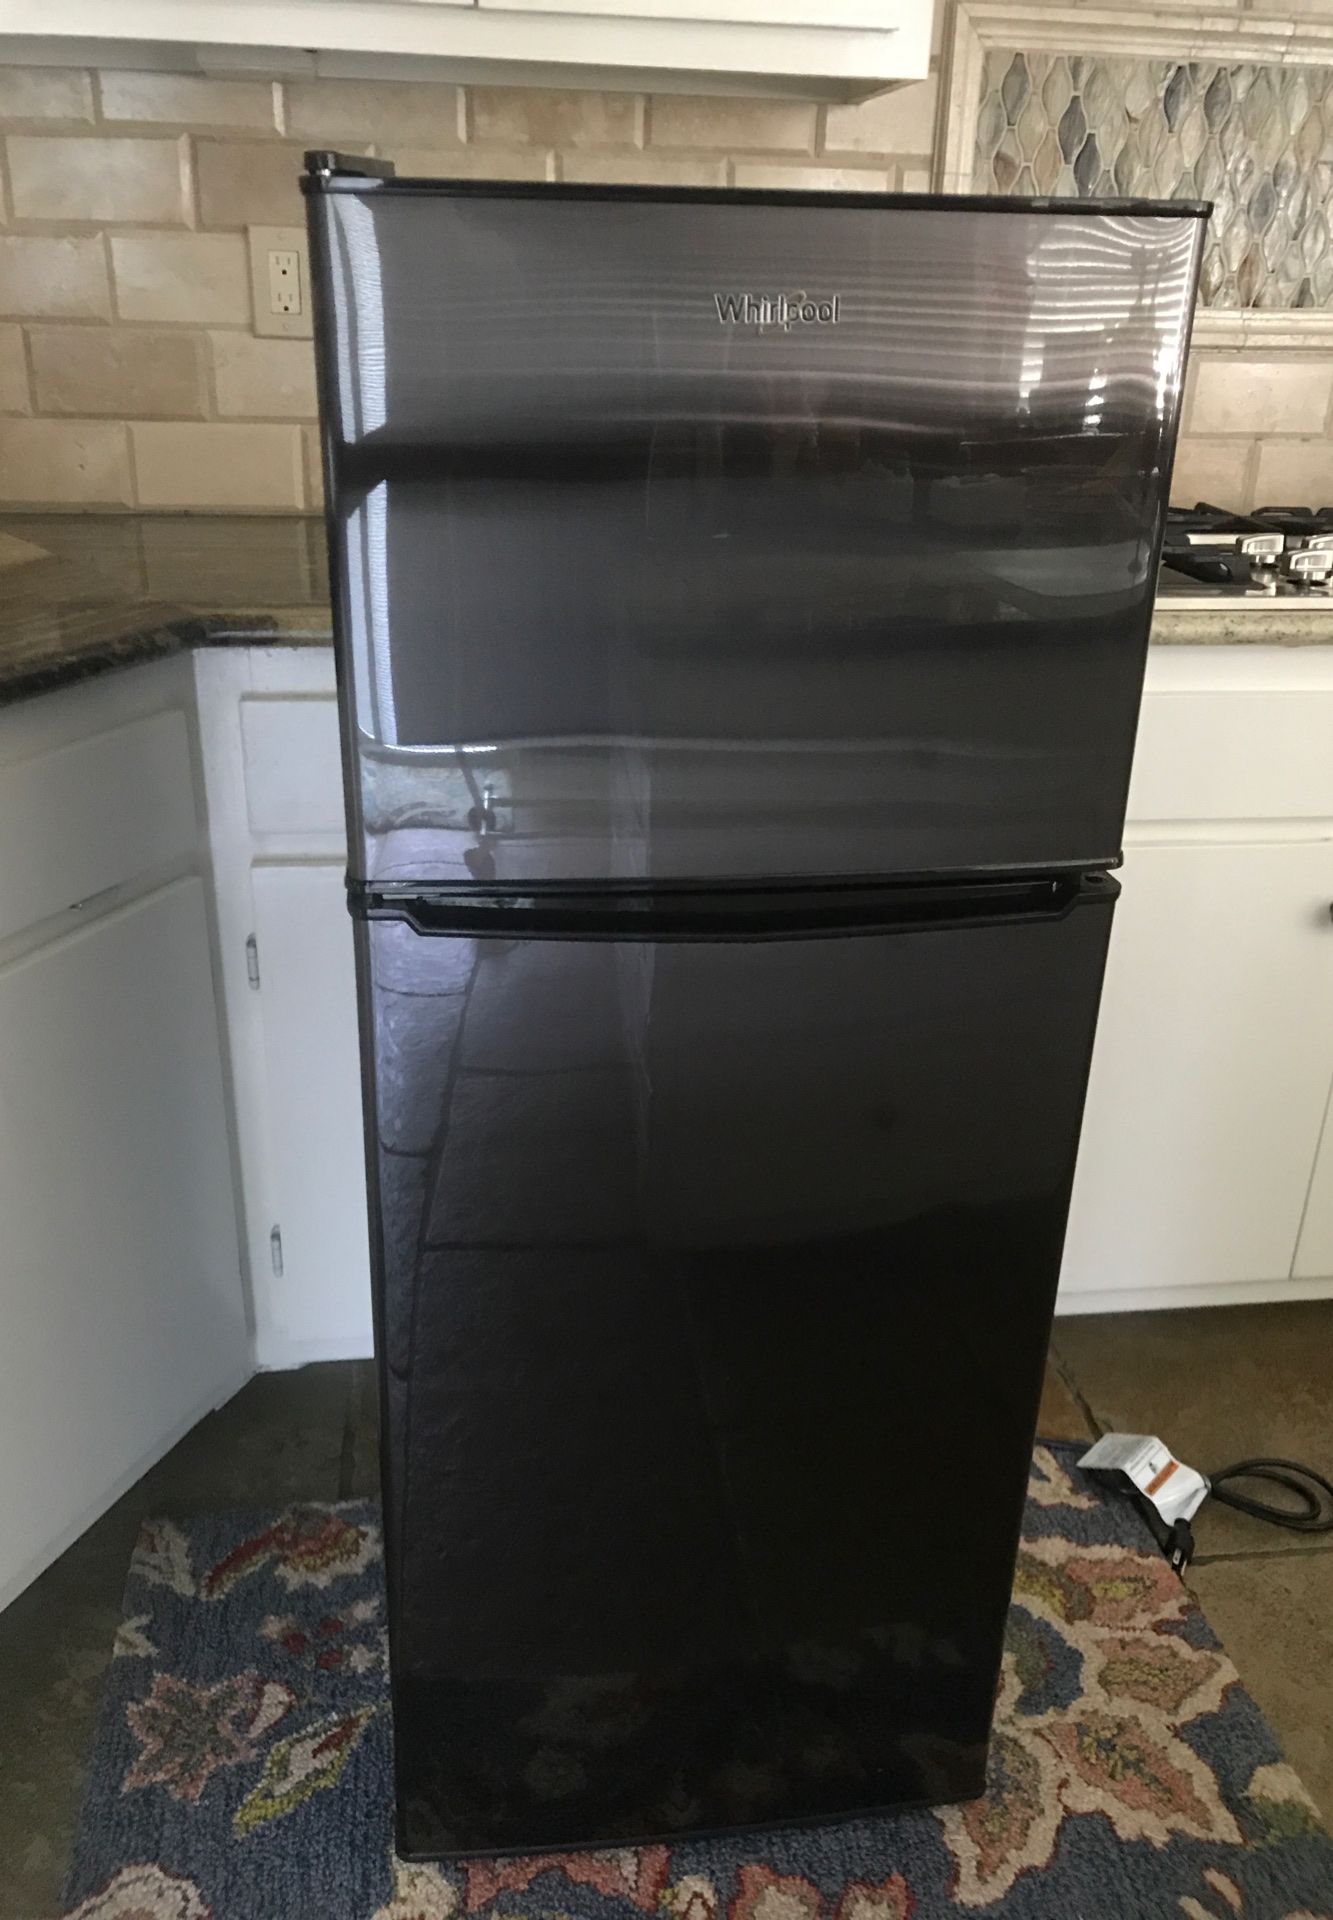 WHIRLPOOL 4.6 CU FT. FREESTANDING COMPACT REFRIGERATOR WITH SEPARATE FREEZER COMPARTMENT (LIKE NEW!) BLACK STAINLESS STEEL FINISH. ENERGY STAR: RETA